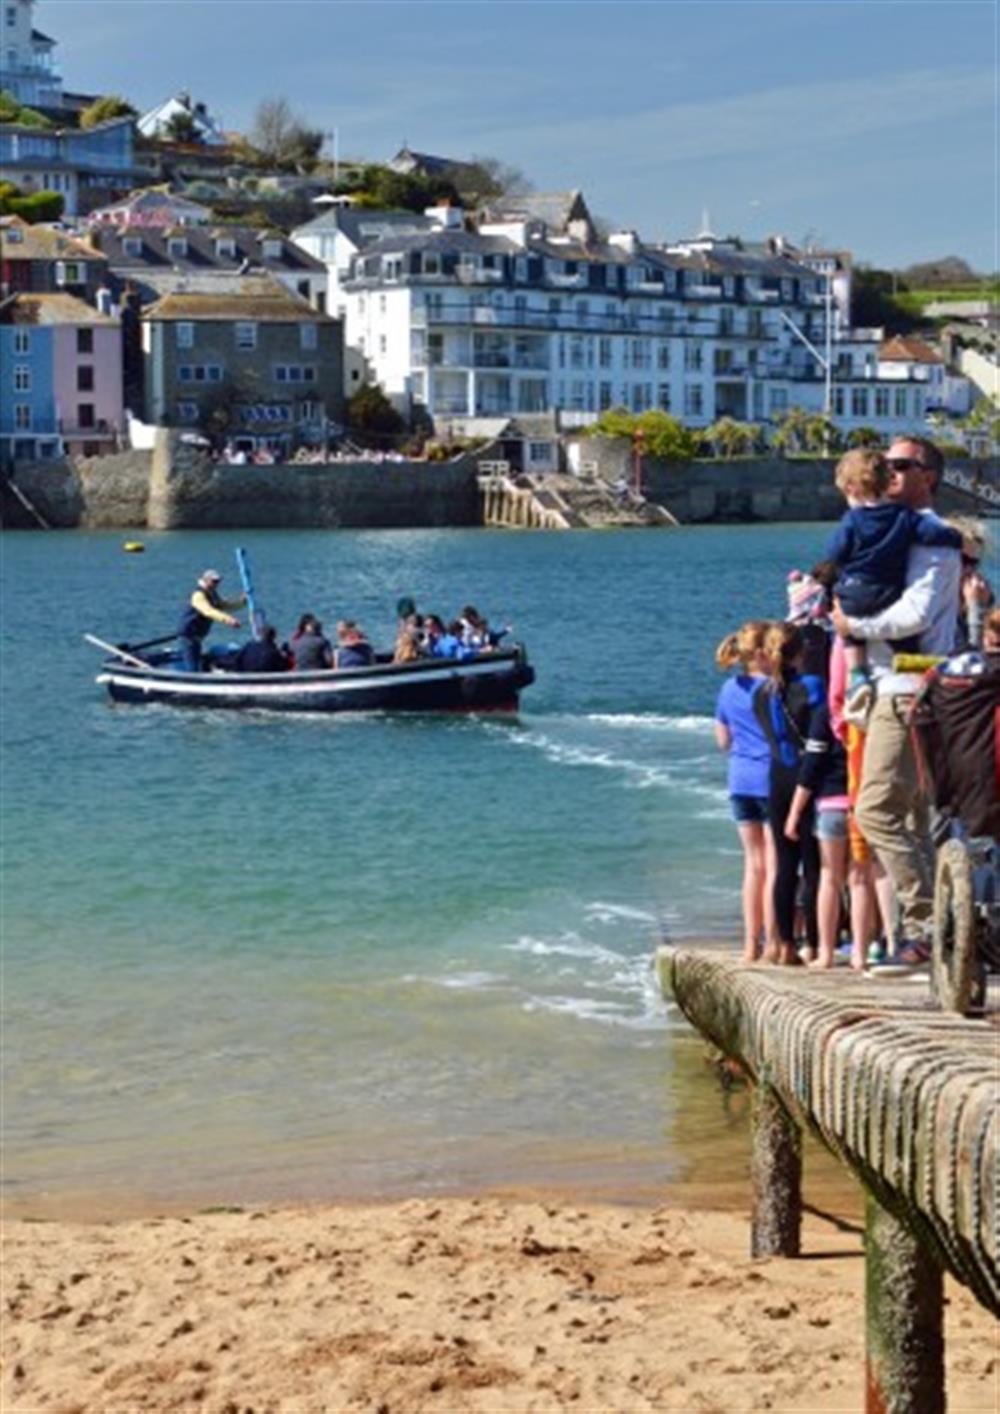 Salcombe is easily accessed by the foot ferry a five minute walk from Arran.